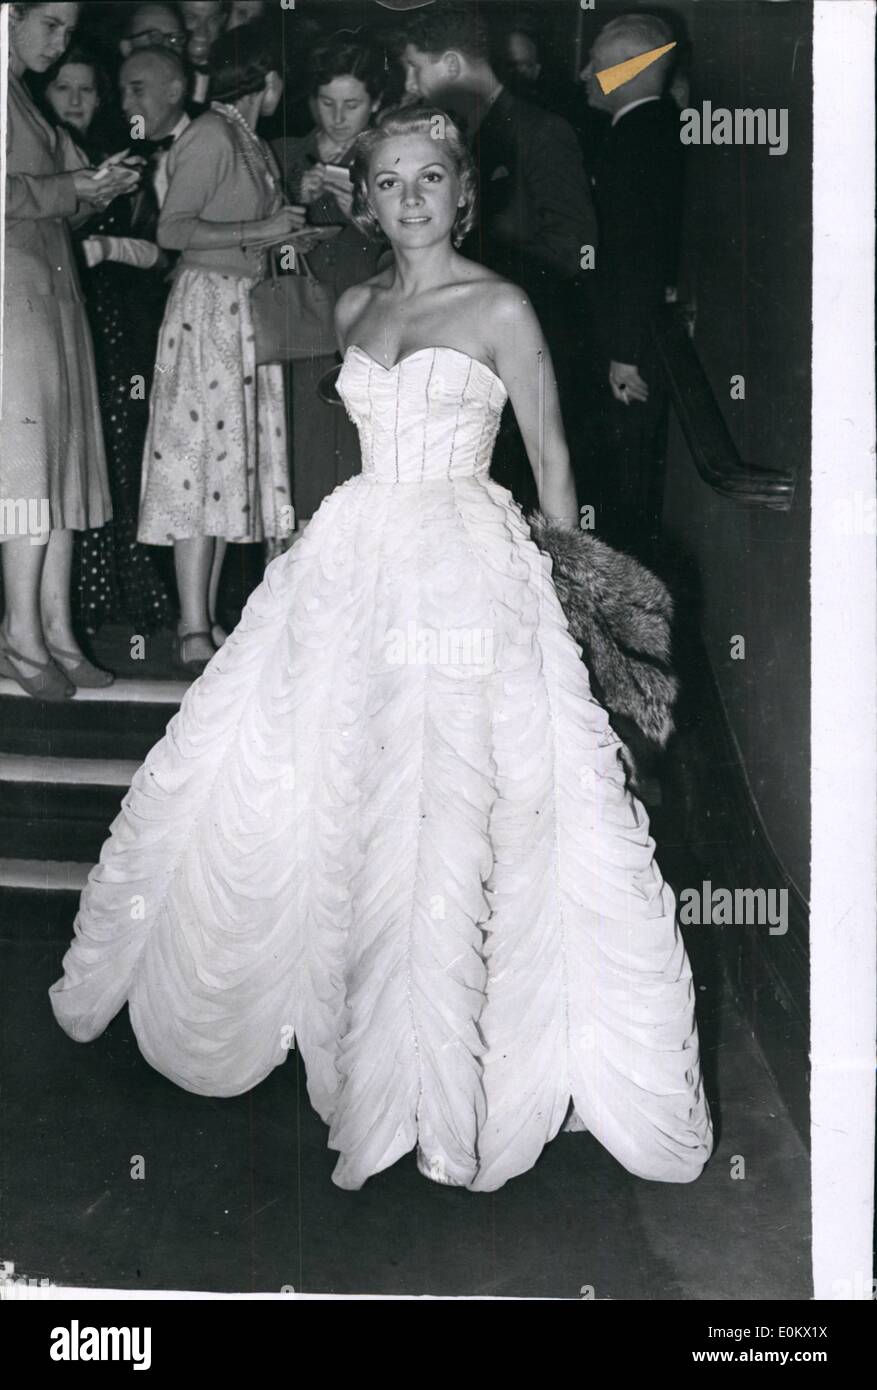 Aug. 08, 1950 - The Charming young lady in the Crinoline gown. ~~~~viere ~~~~ at the First wight. Lovely Geneviere Guitry makes Stock Photo